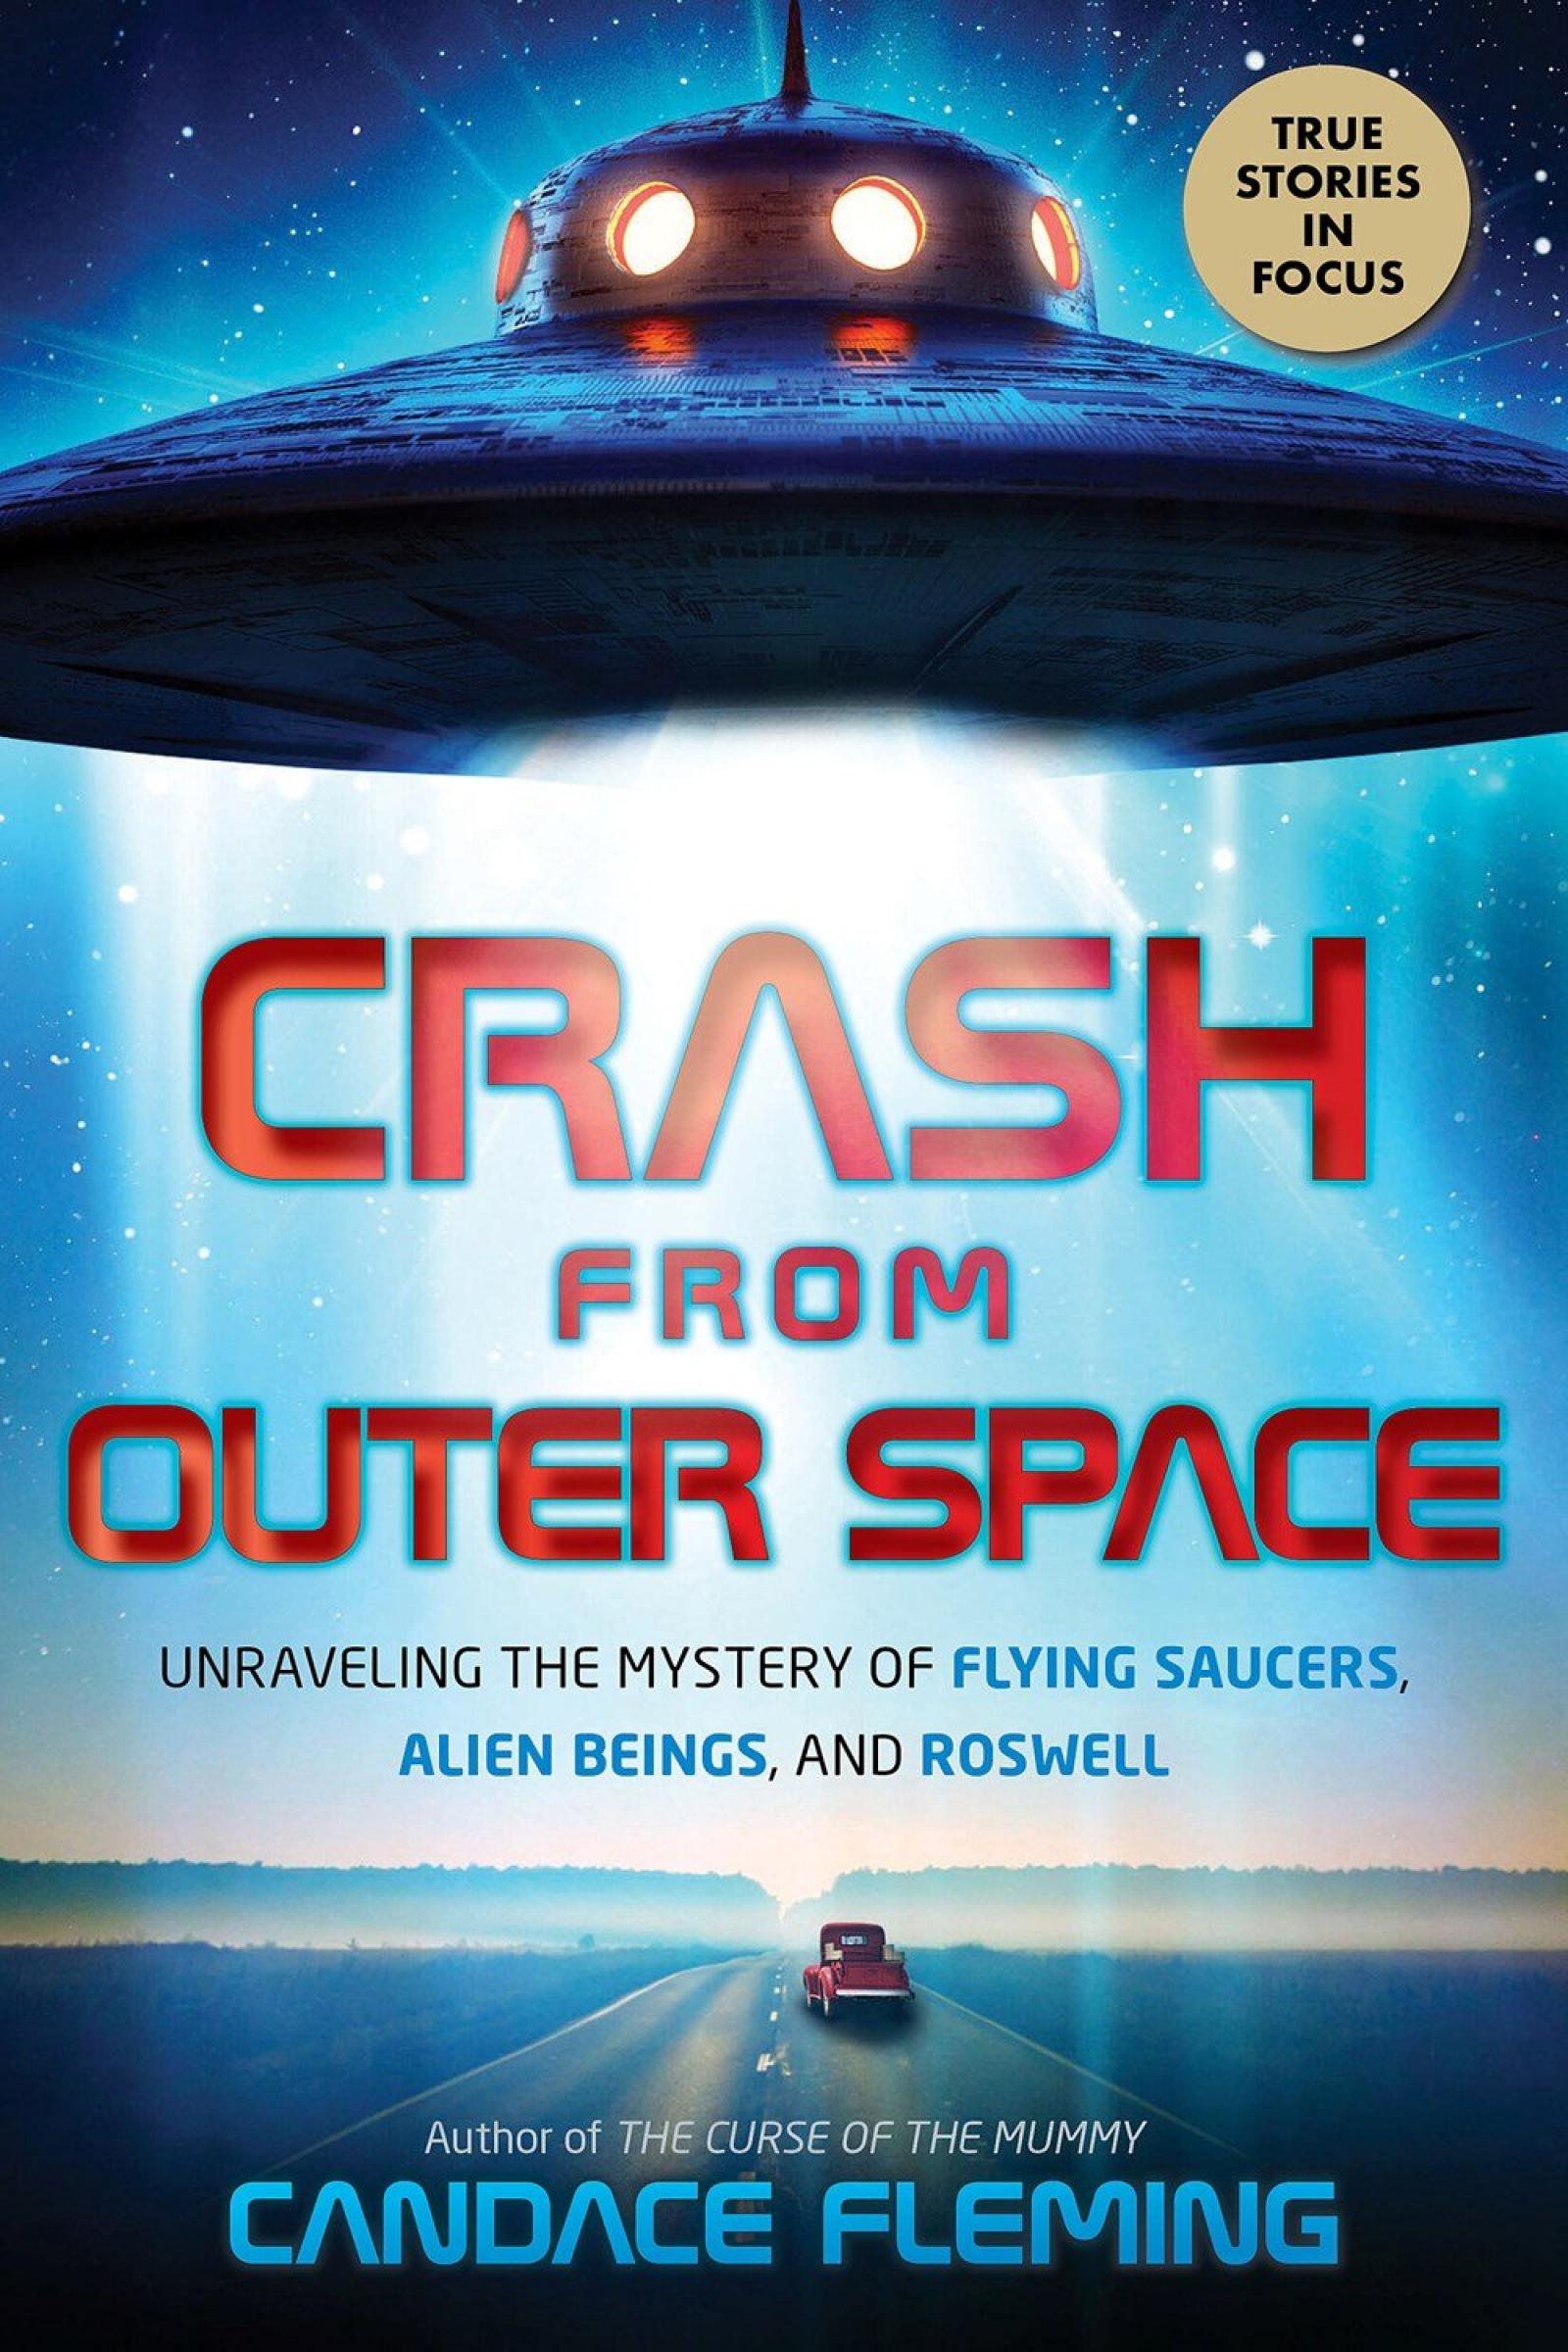 Crash from Outer Space by Candace Fleming